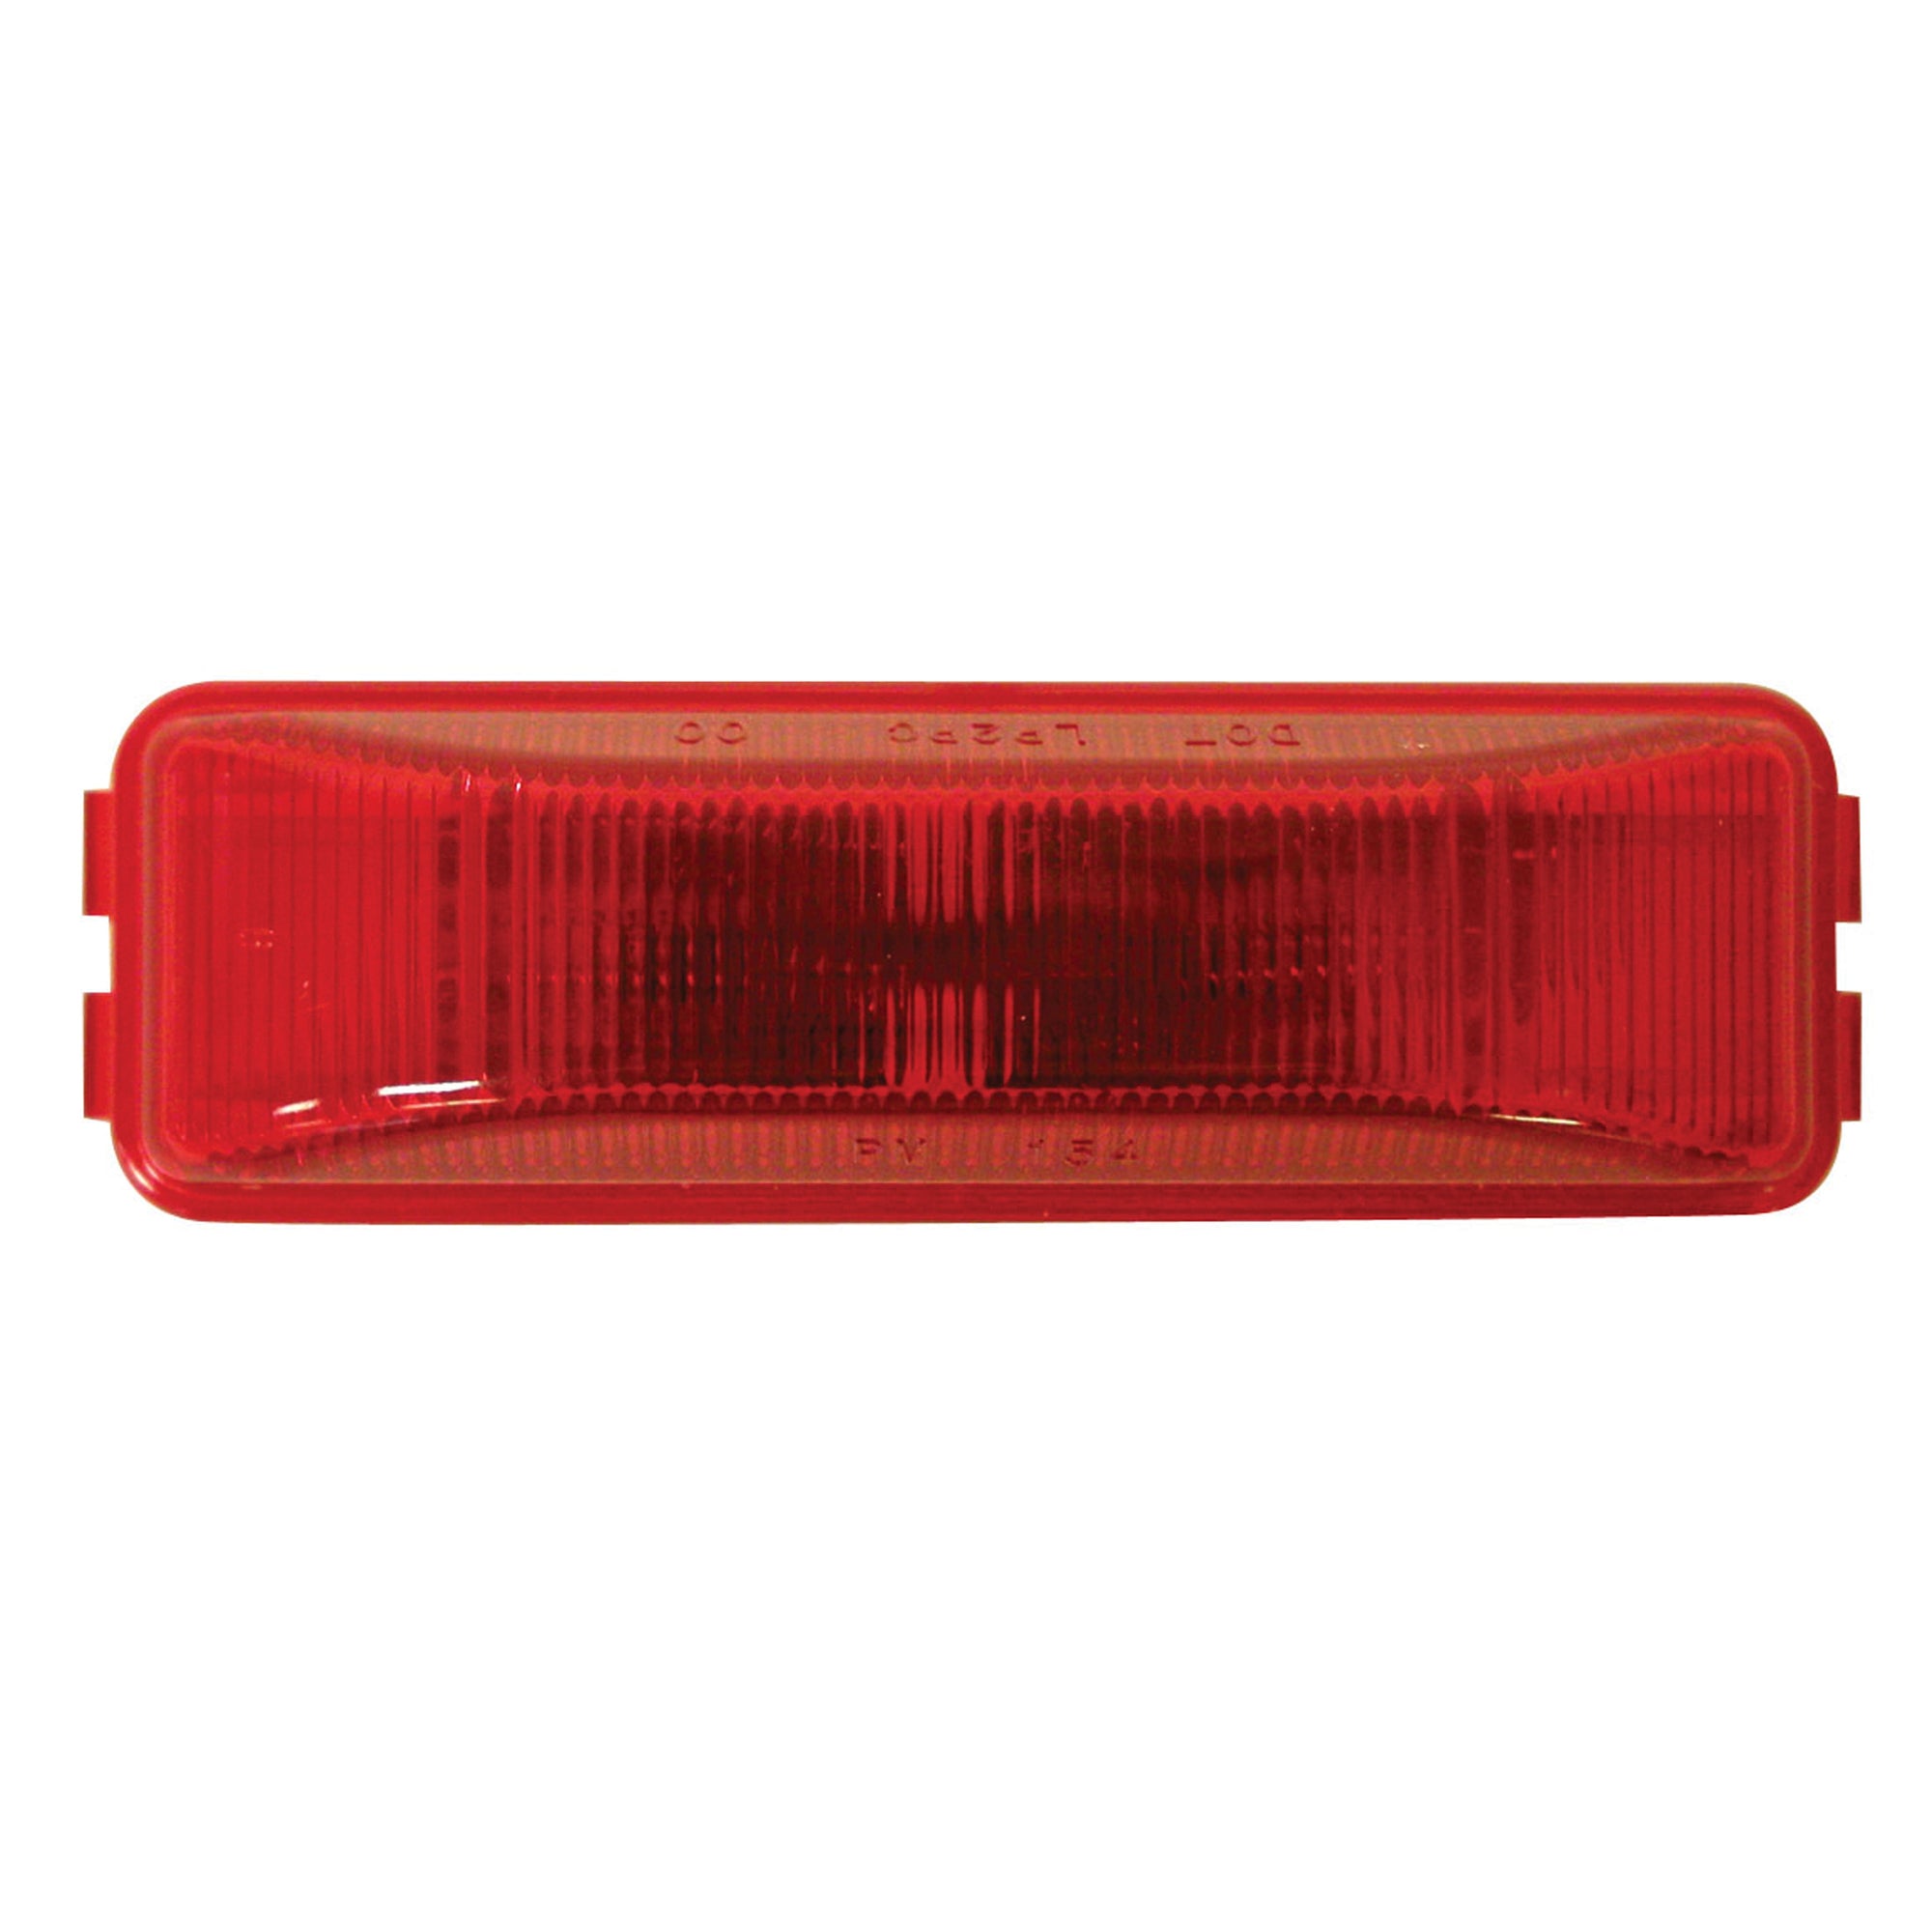 Peterson Manufacturing V154R Clearance/Side Marker Light - Red